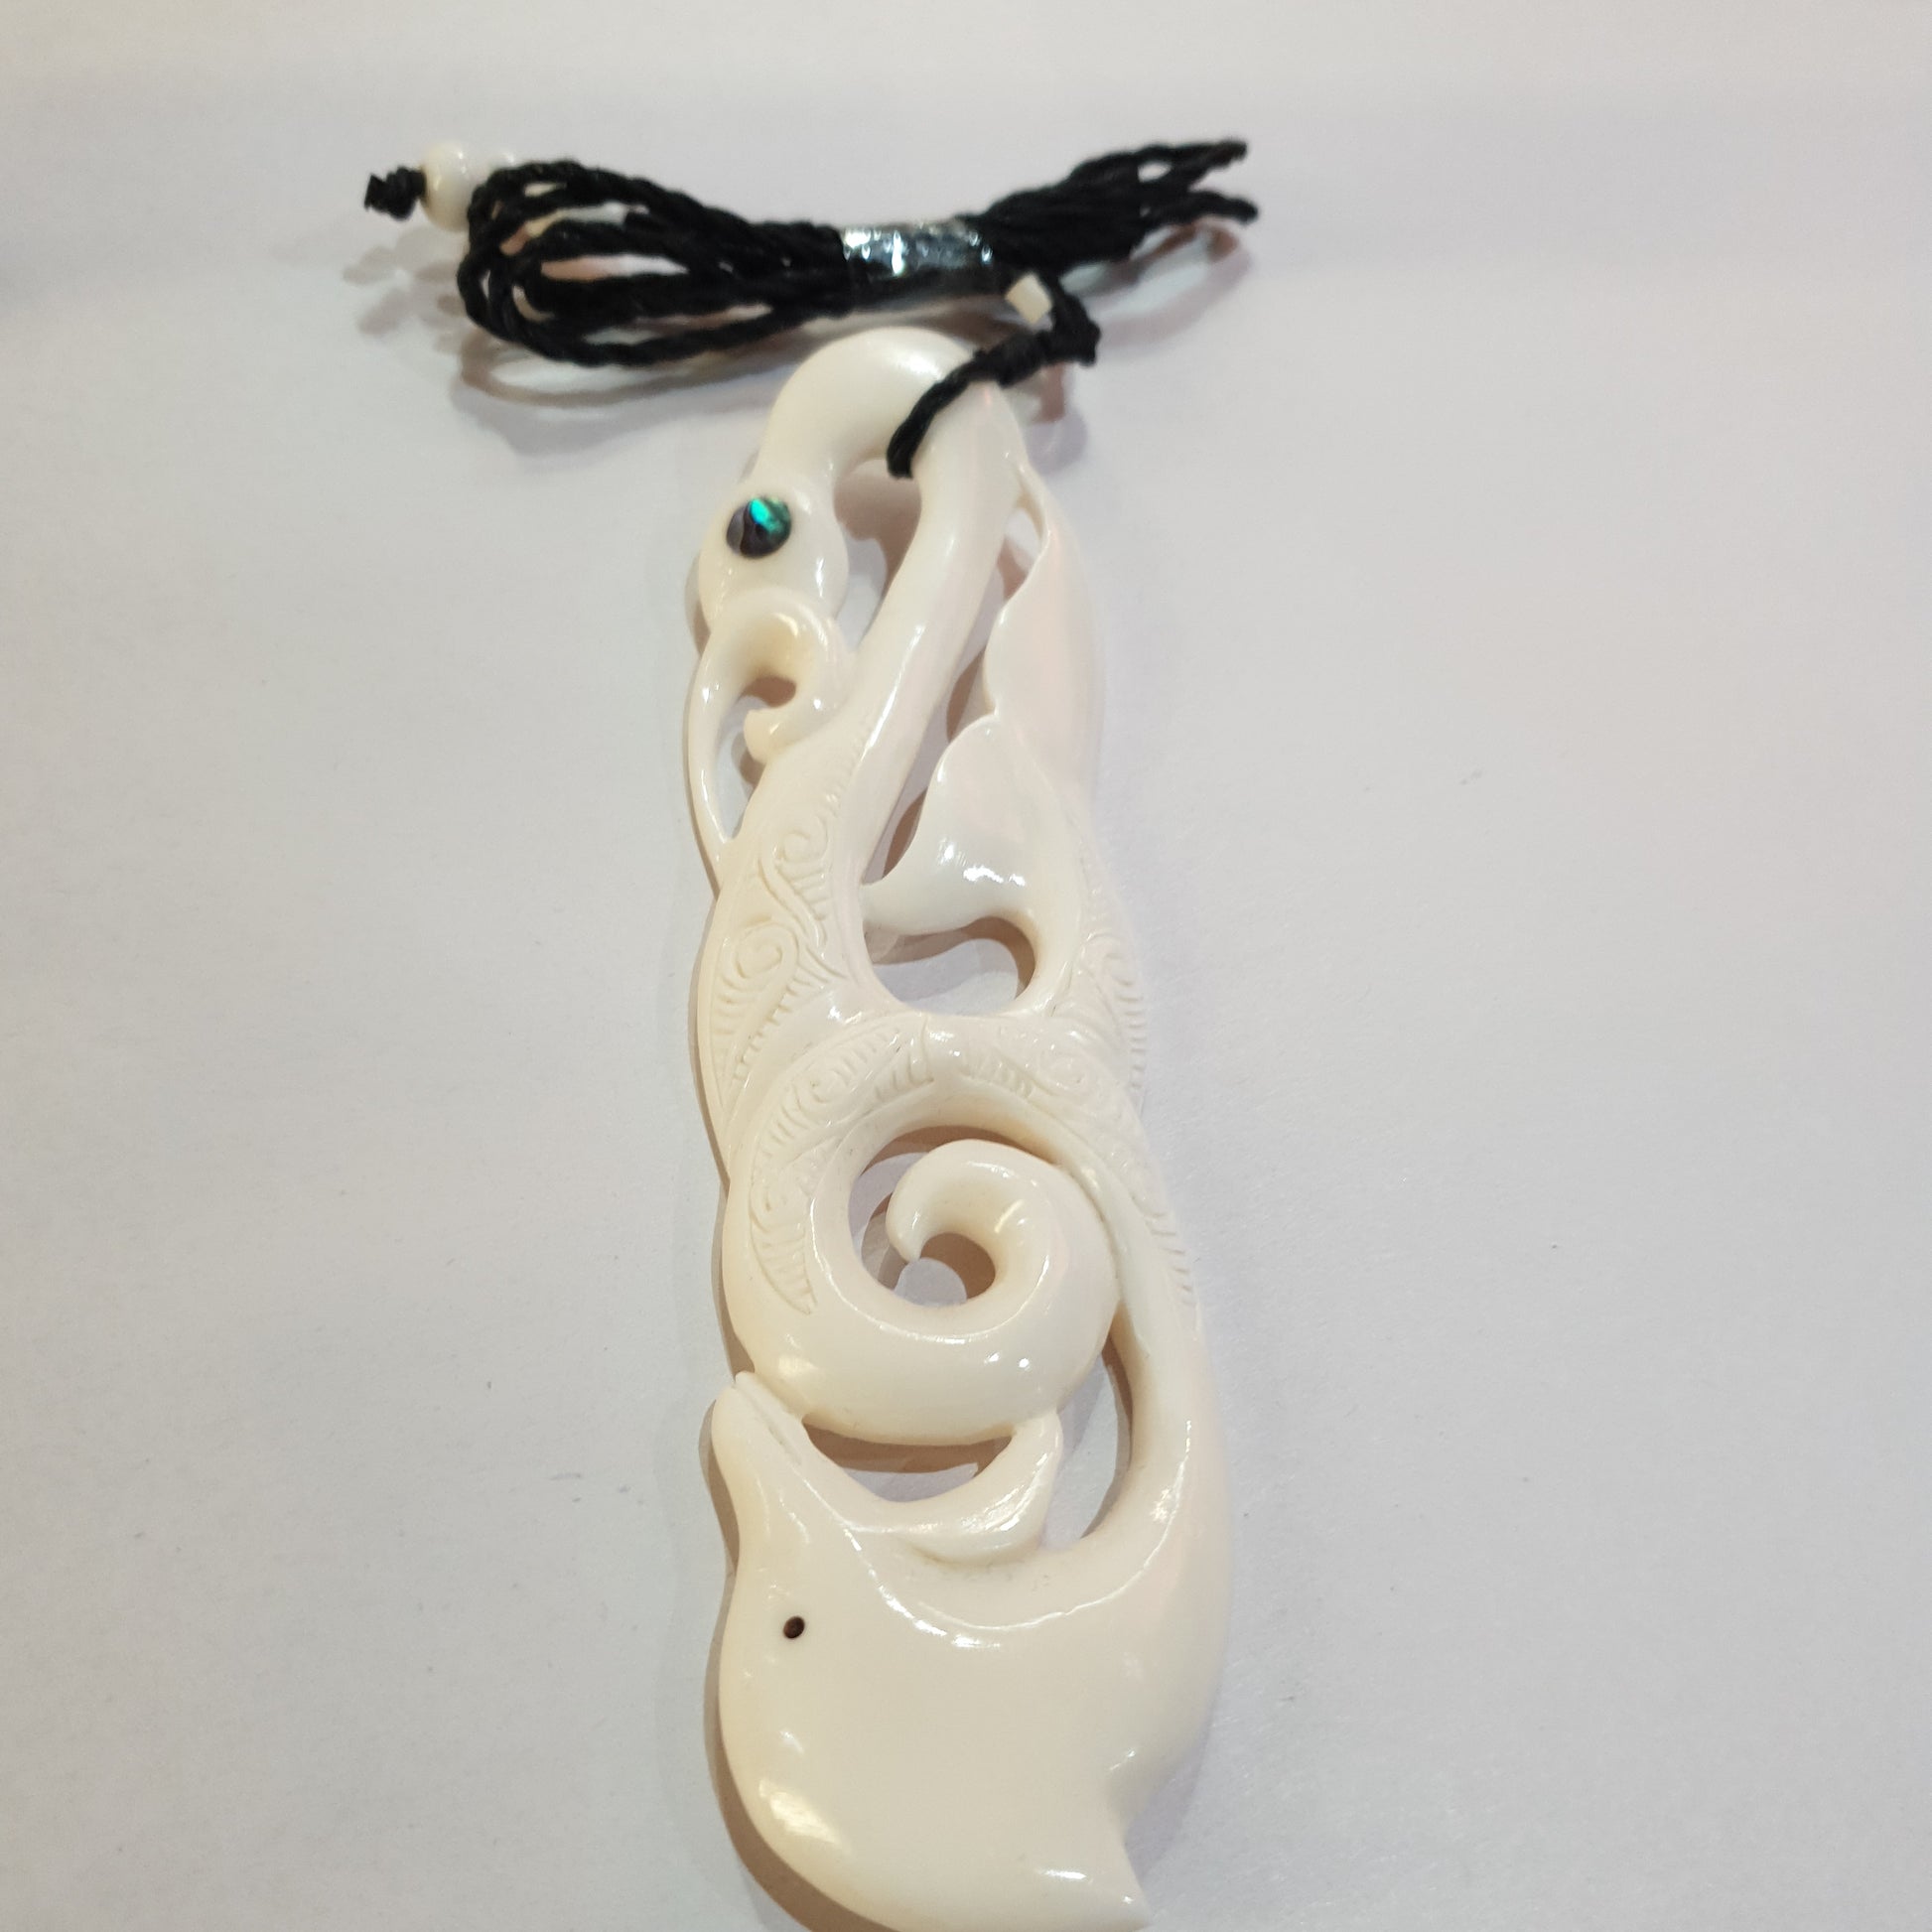 Hand Carved Bone Pendant large with adjustable cord - Rivendell Shop